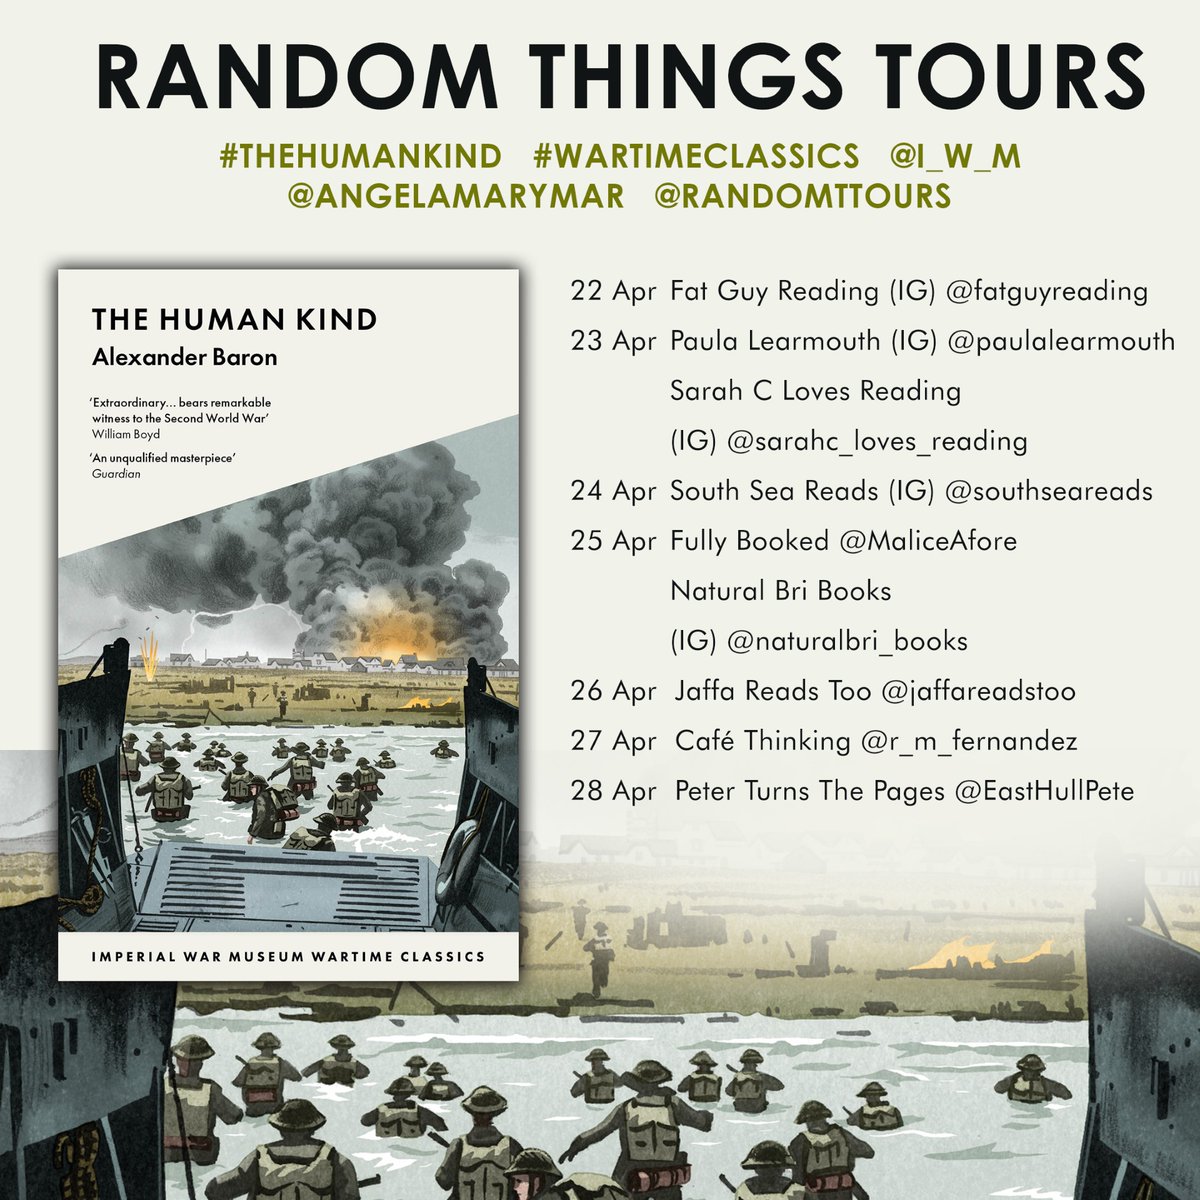 Thrilled to work with @angelamarymar on this @I_W_M #WartimeClassics #RandomThingsTours Blog Tour for #TheHumanKind by #AlexanderBaron Begins 22 April